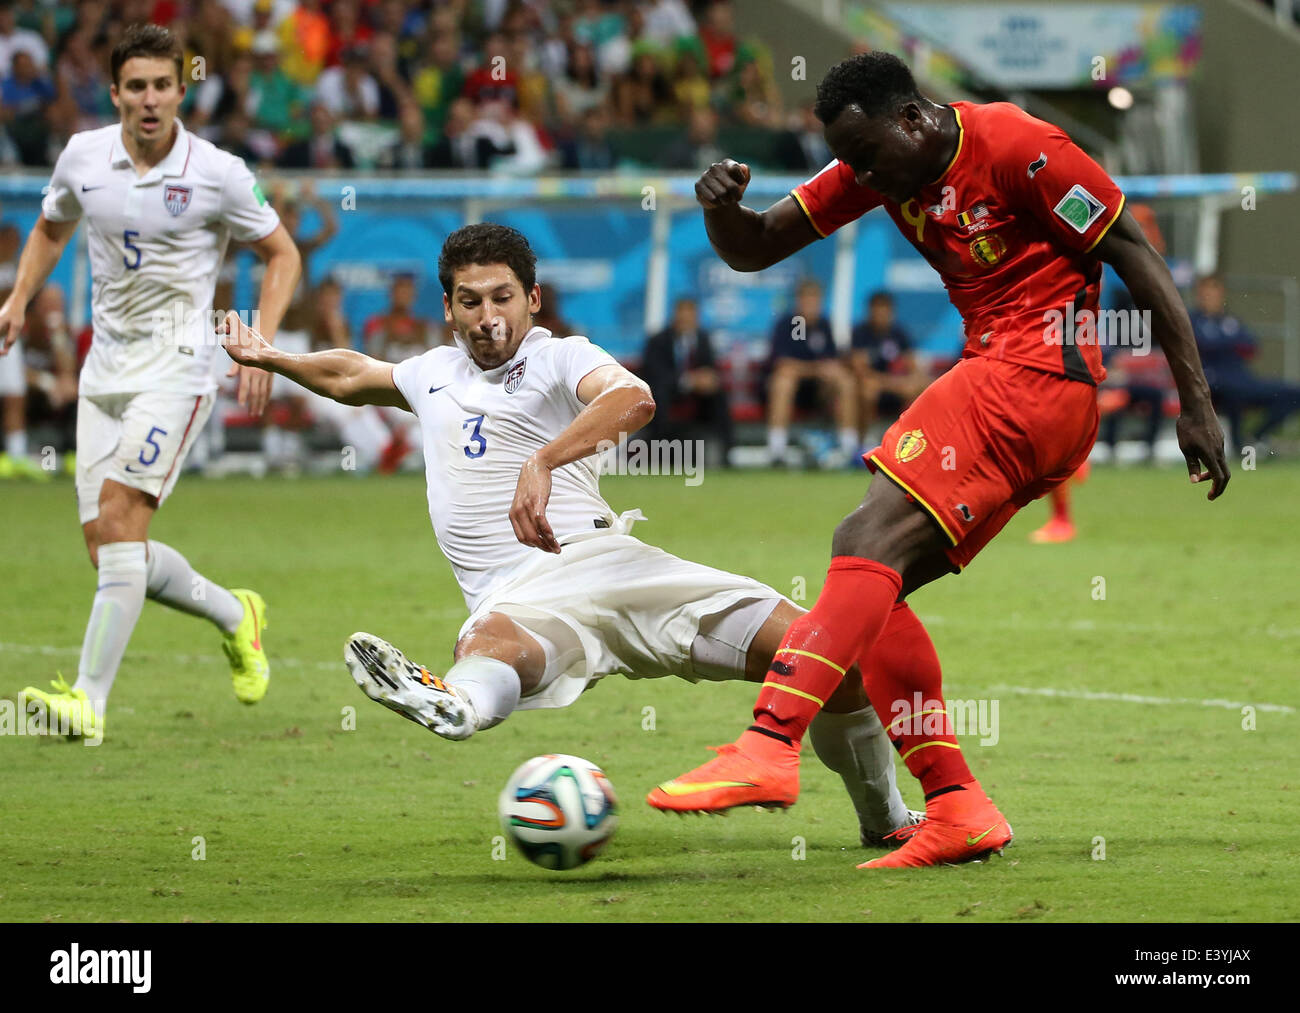 Salvador, Brazil. 1st July, 2014. Belgium's Romelu Lukaku (R) vies with Omar Gonzalez (C) of the U.S. during the extra time of a Round of 16 match between Belgium and the U.S. of 2014 FIFA World Cup at the Arena Fonte Nova Stadium in Salvador, Brazil, on July 1, 2014. Belgium won 2-1 over the U.S. after 120 minutes and qualified for quarter-finals on Tuesday. Credit:  Cao Can/Xinhua/Alamy Live News Stock Photo